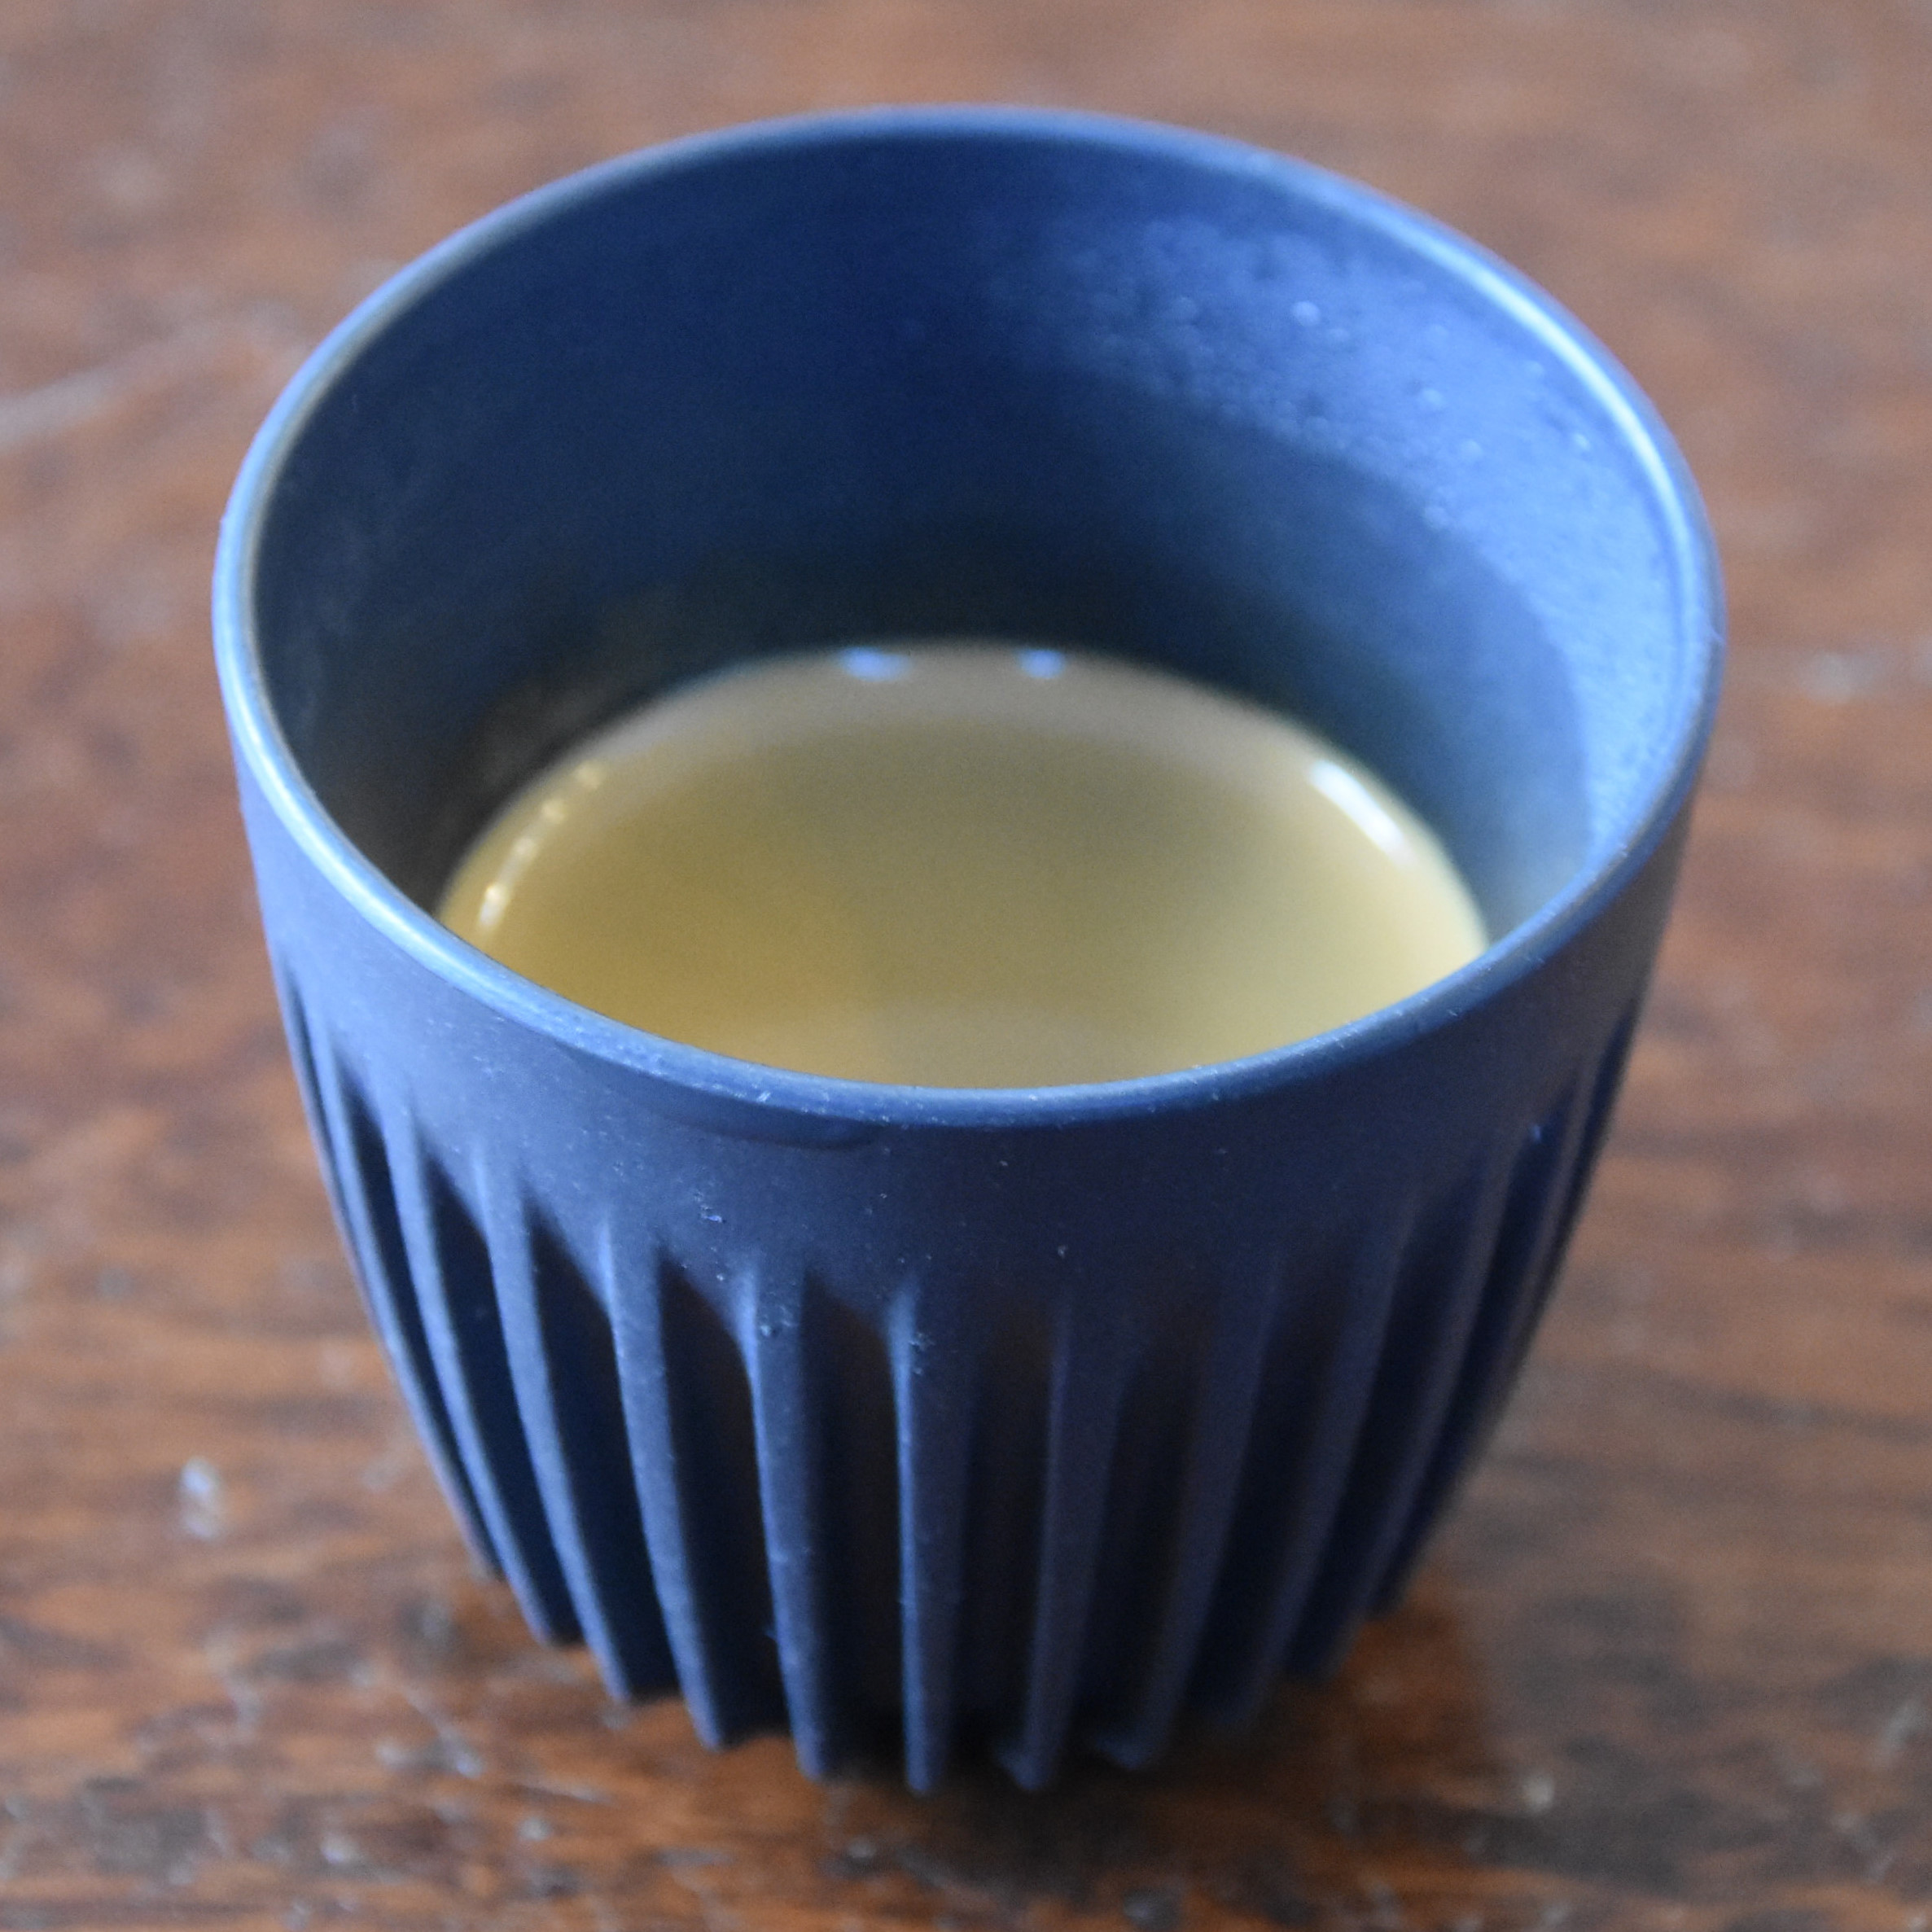 The distinctive HuskeeCup with its ribbed sides, but only 3oz in capacity, holding my espresso at Nomad Coffee Co.